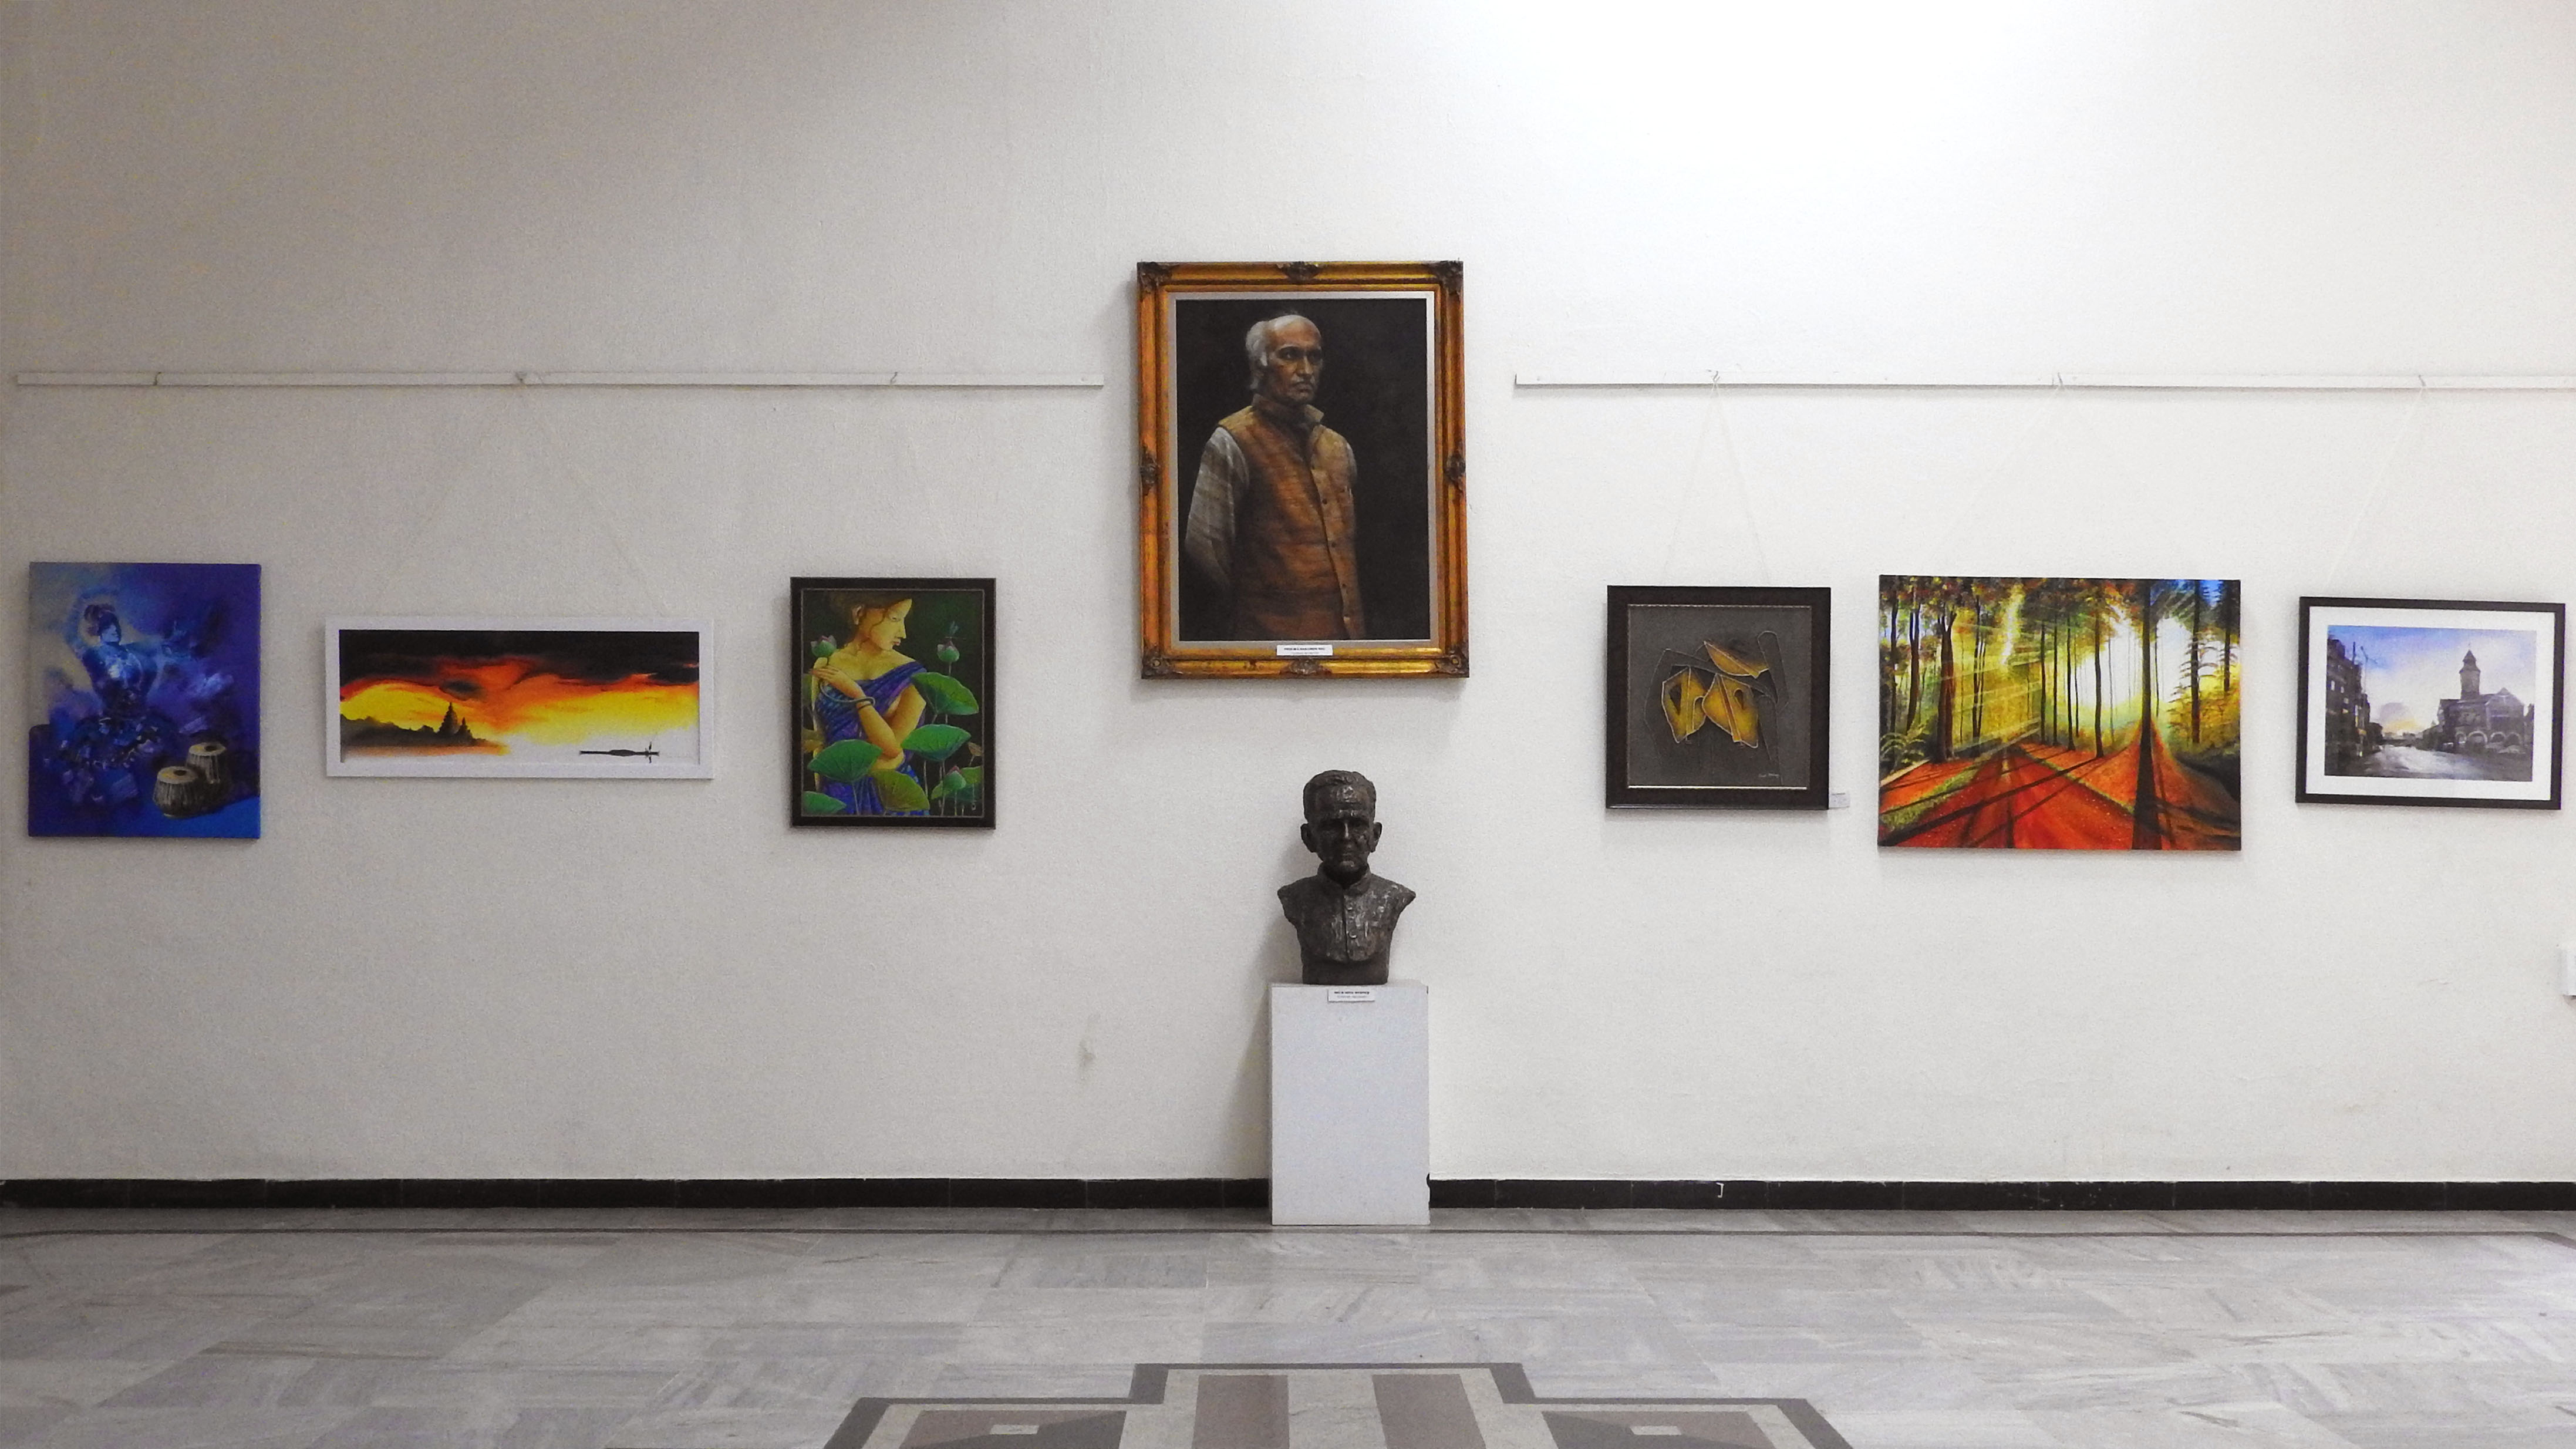 Over at Karnataka Chitrakala Parishath, one can soak up the city’s cultural side. With 18 galleries devoted to paintings, photography and folk art, the space is a must-do for art lovers. Photo by Elita Almeida